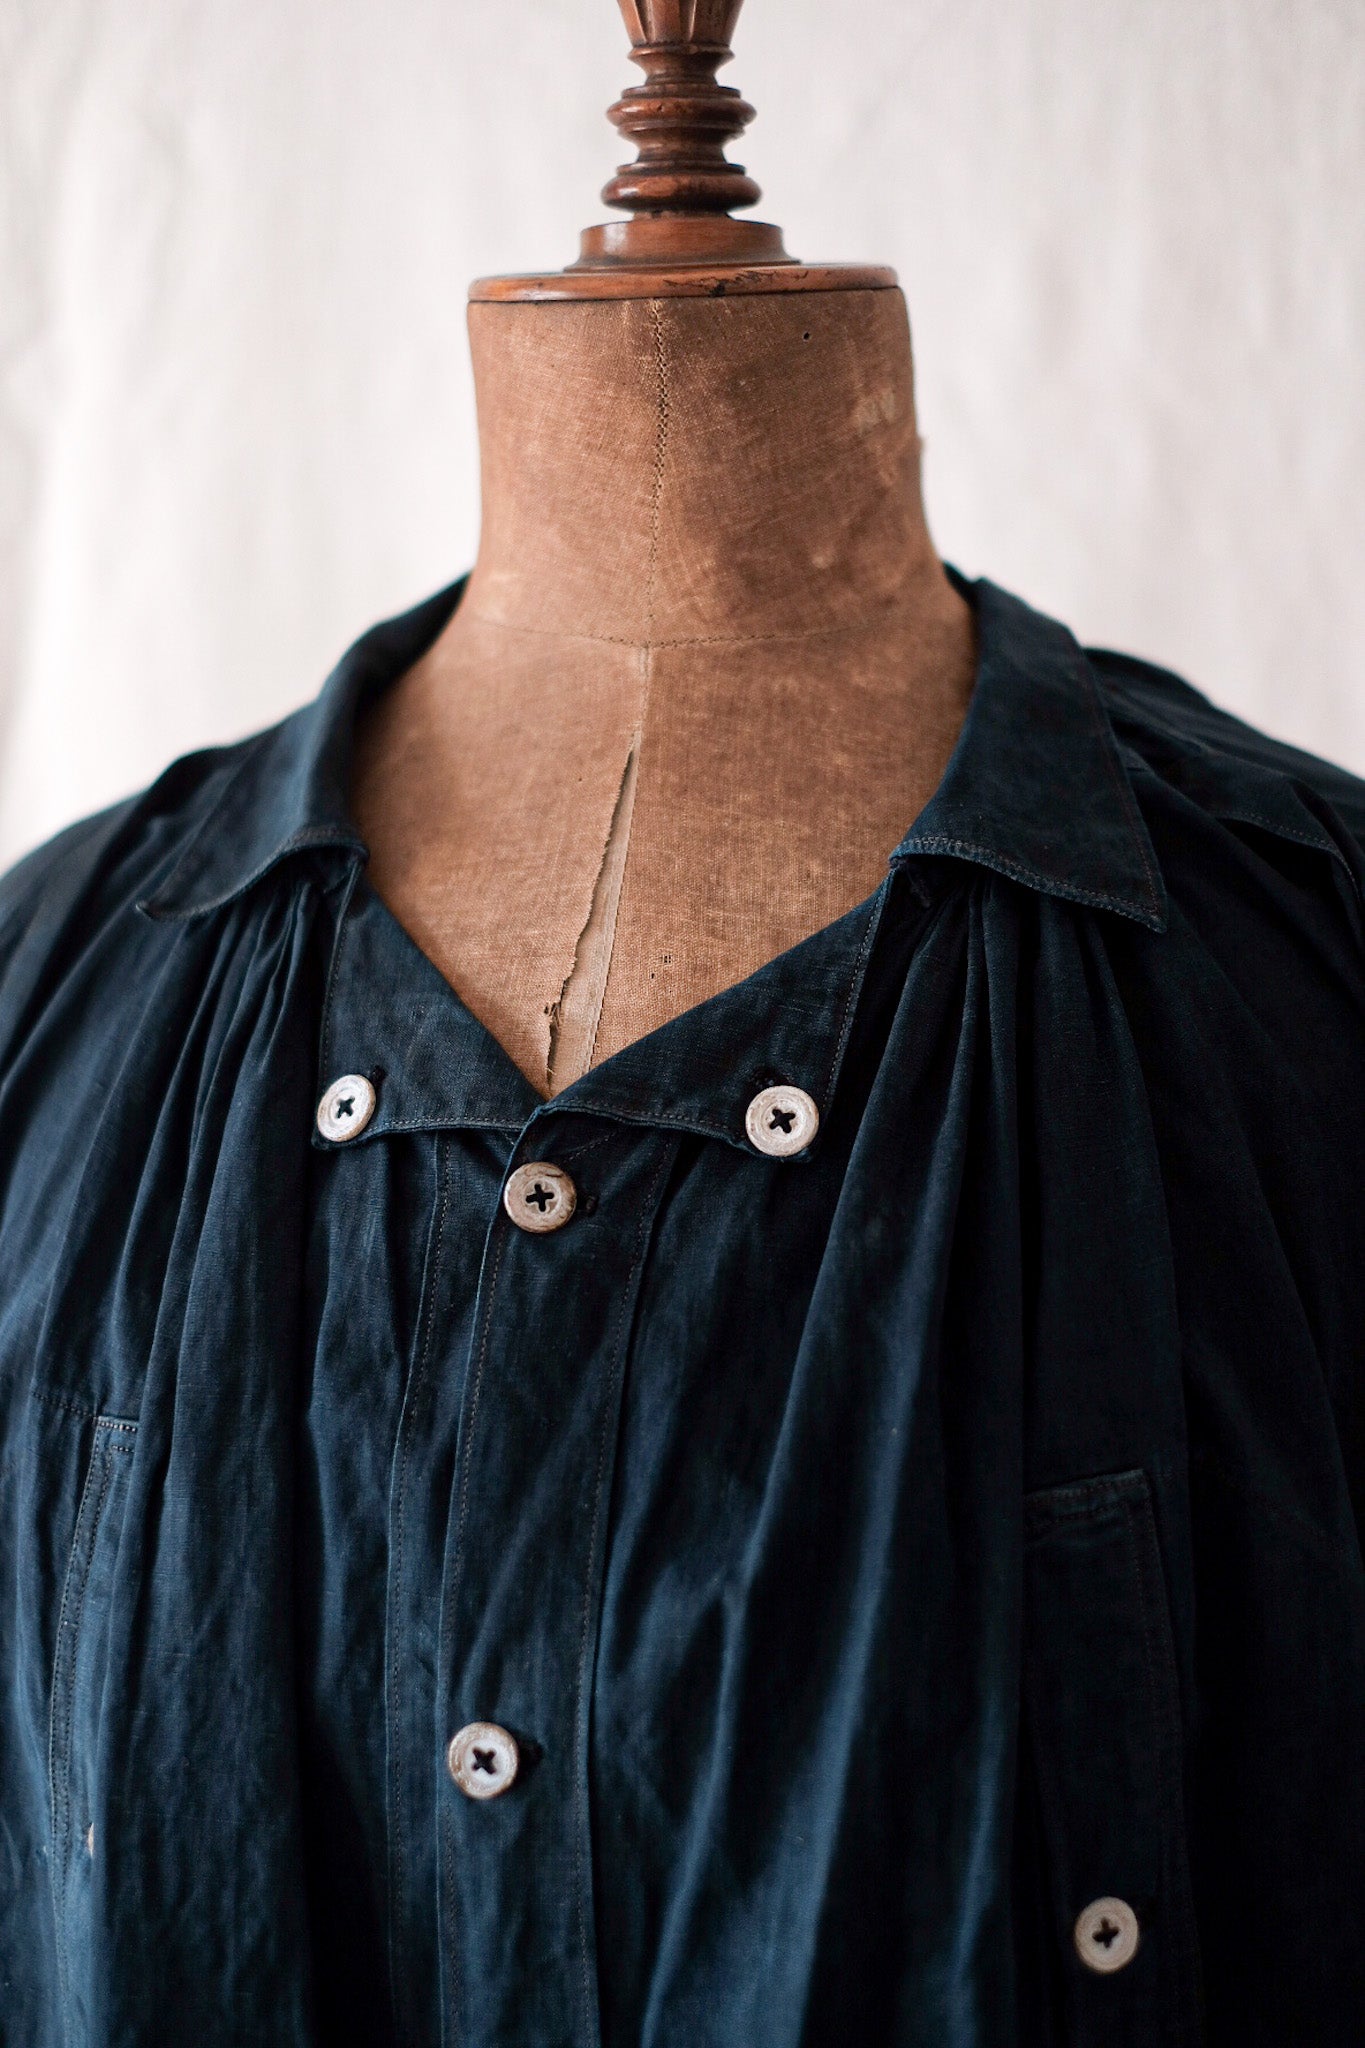 [Early 20th C] French Antique Indigo Linen Smock Open Type "Biaude"